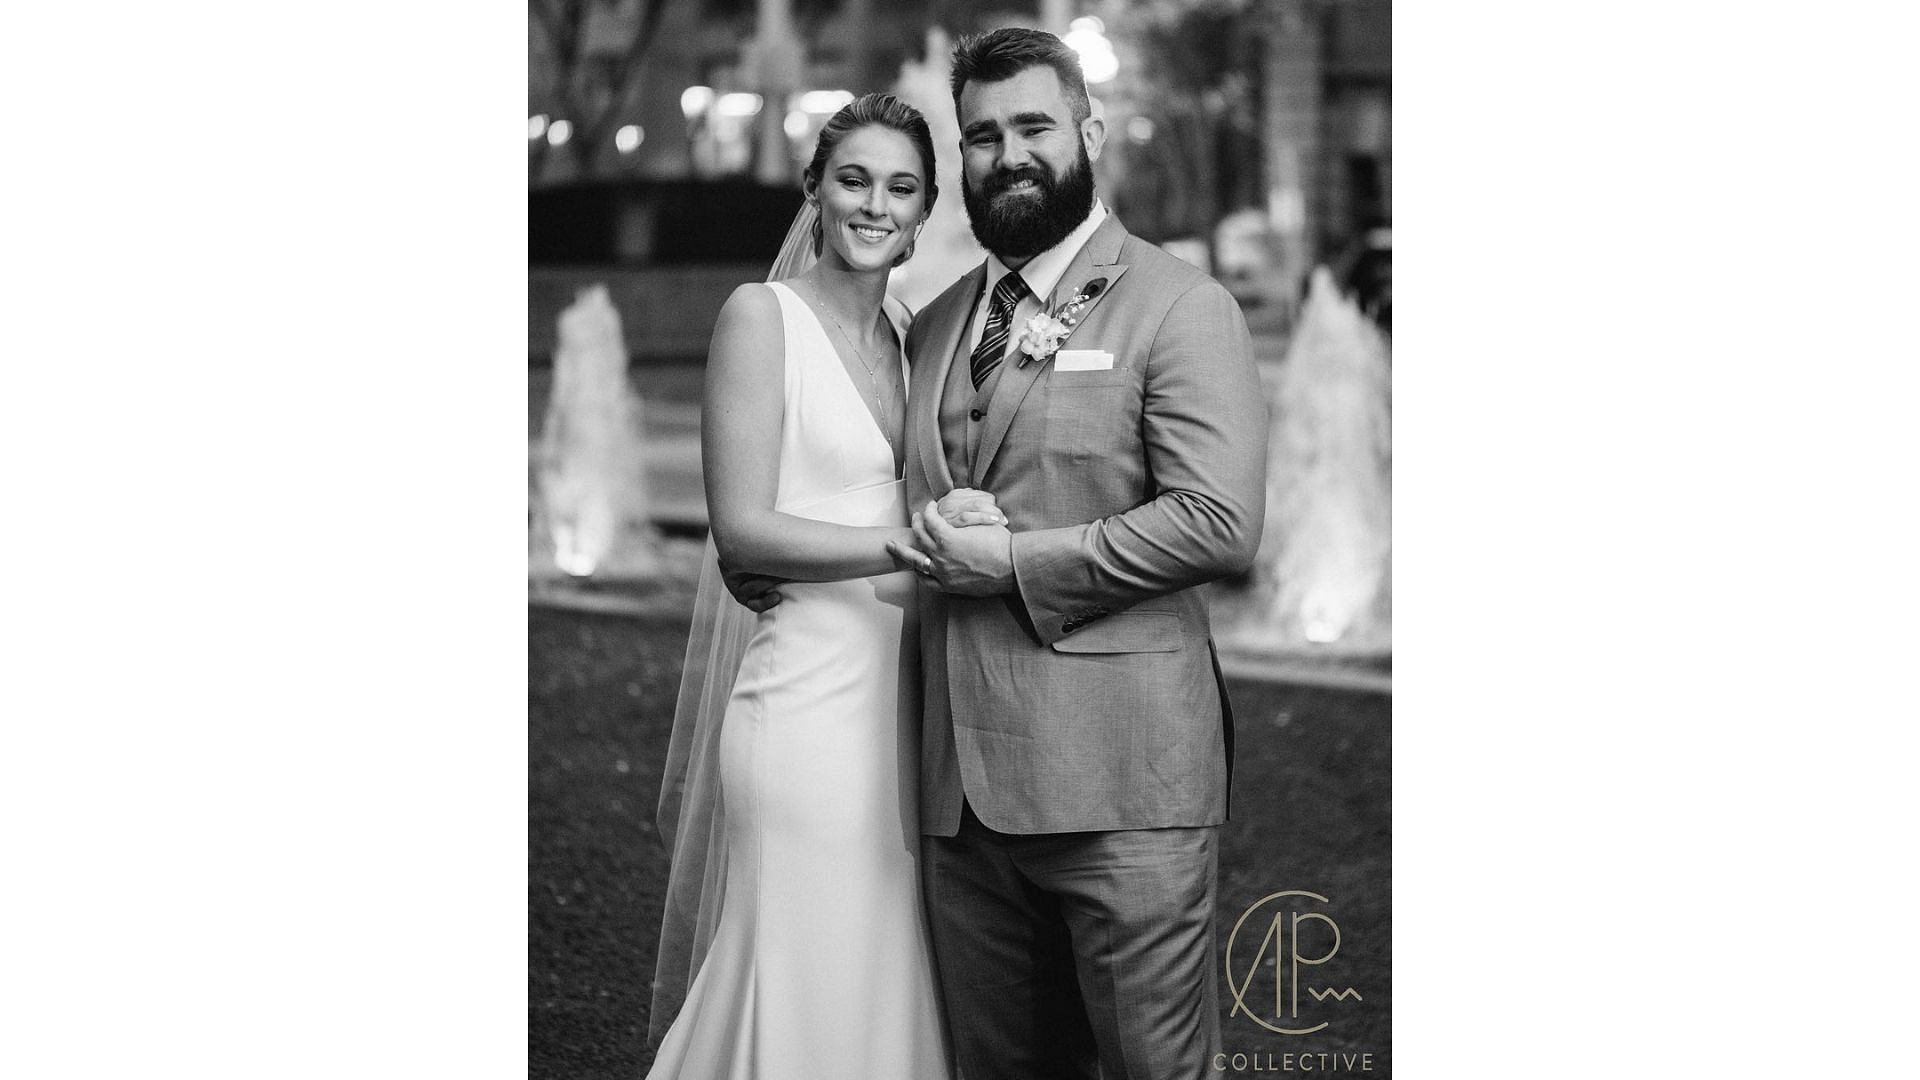 Jason Kelce and Kylie on their wedding day, April 14, 2018. (Image credit: @kykelce official IG)